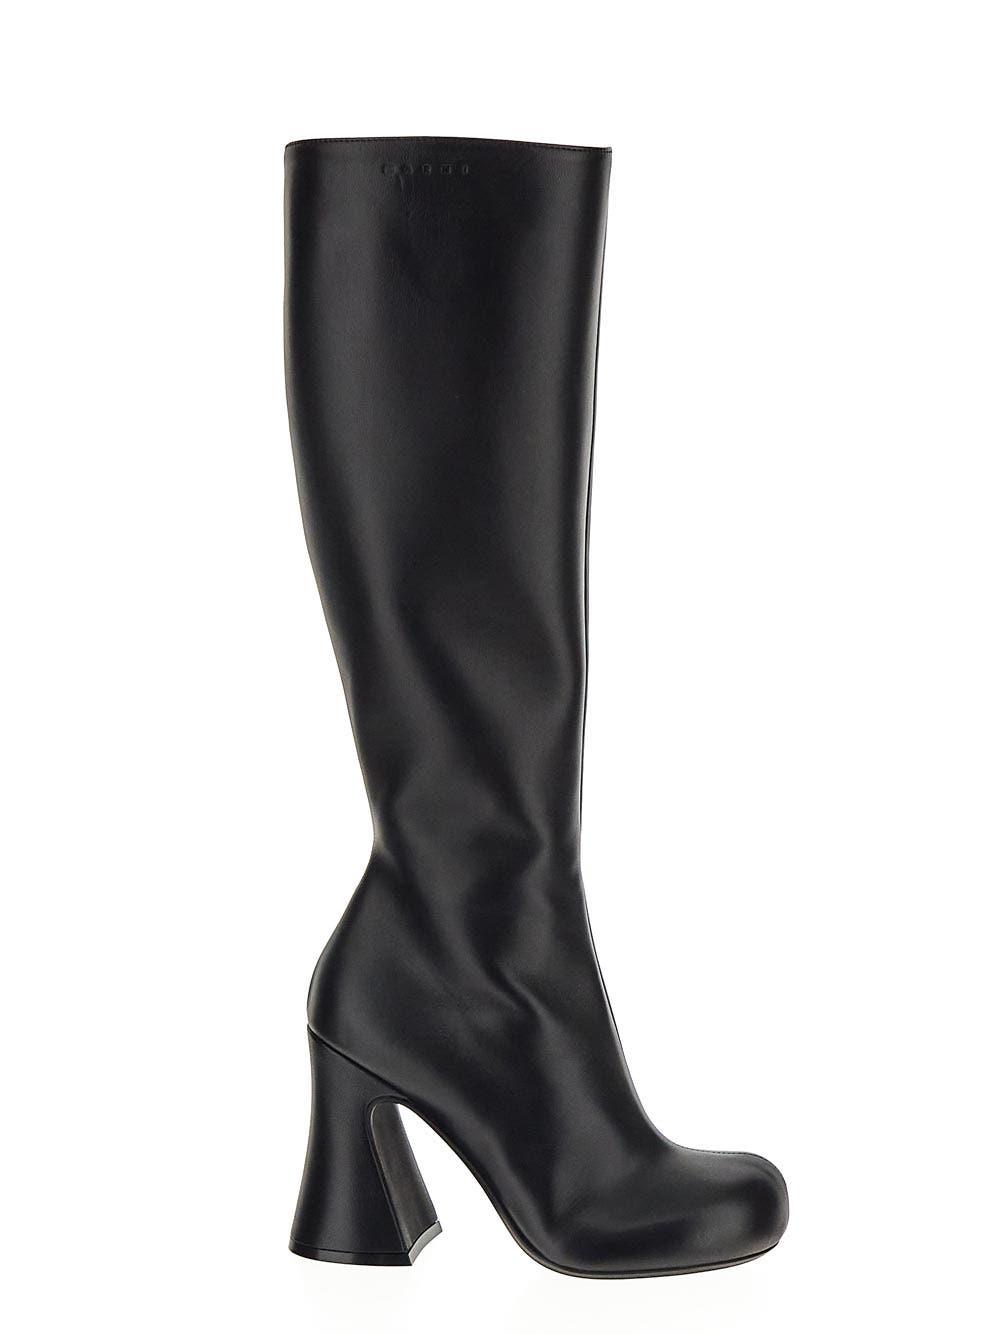 Marni Black Leather High Boots | Lyst